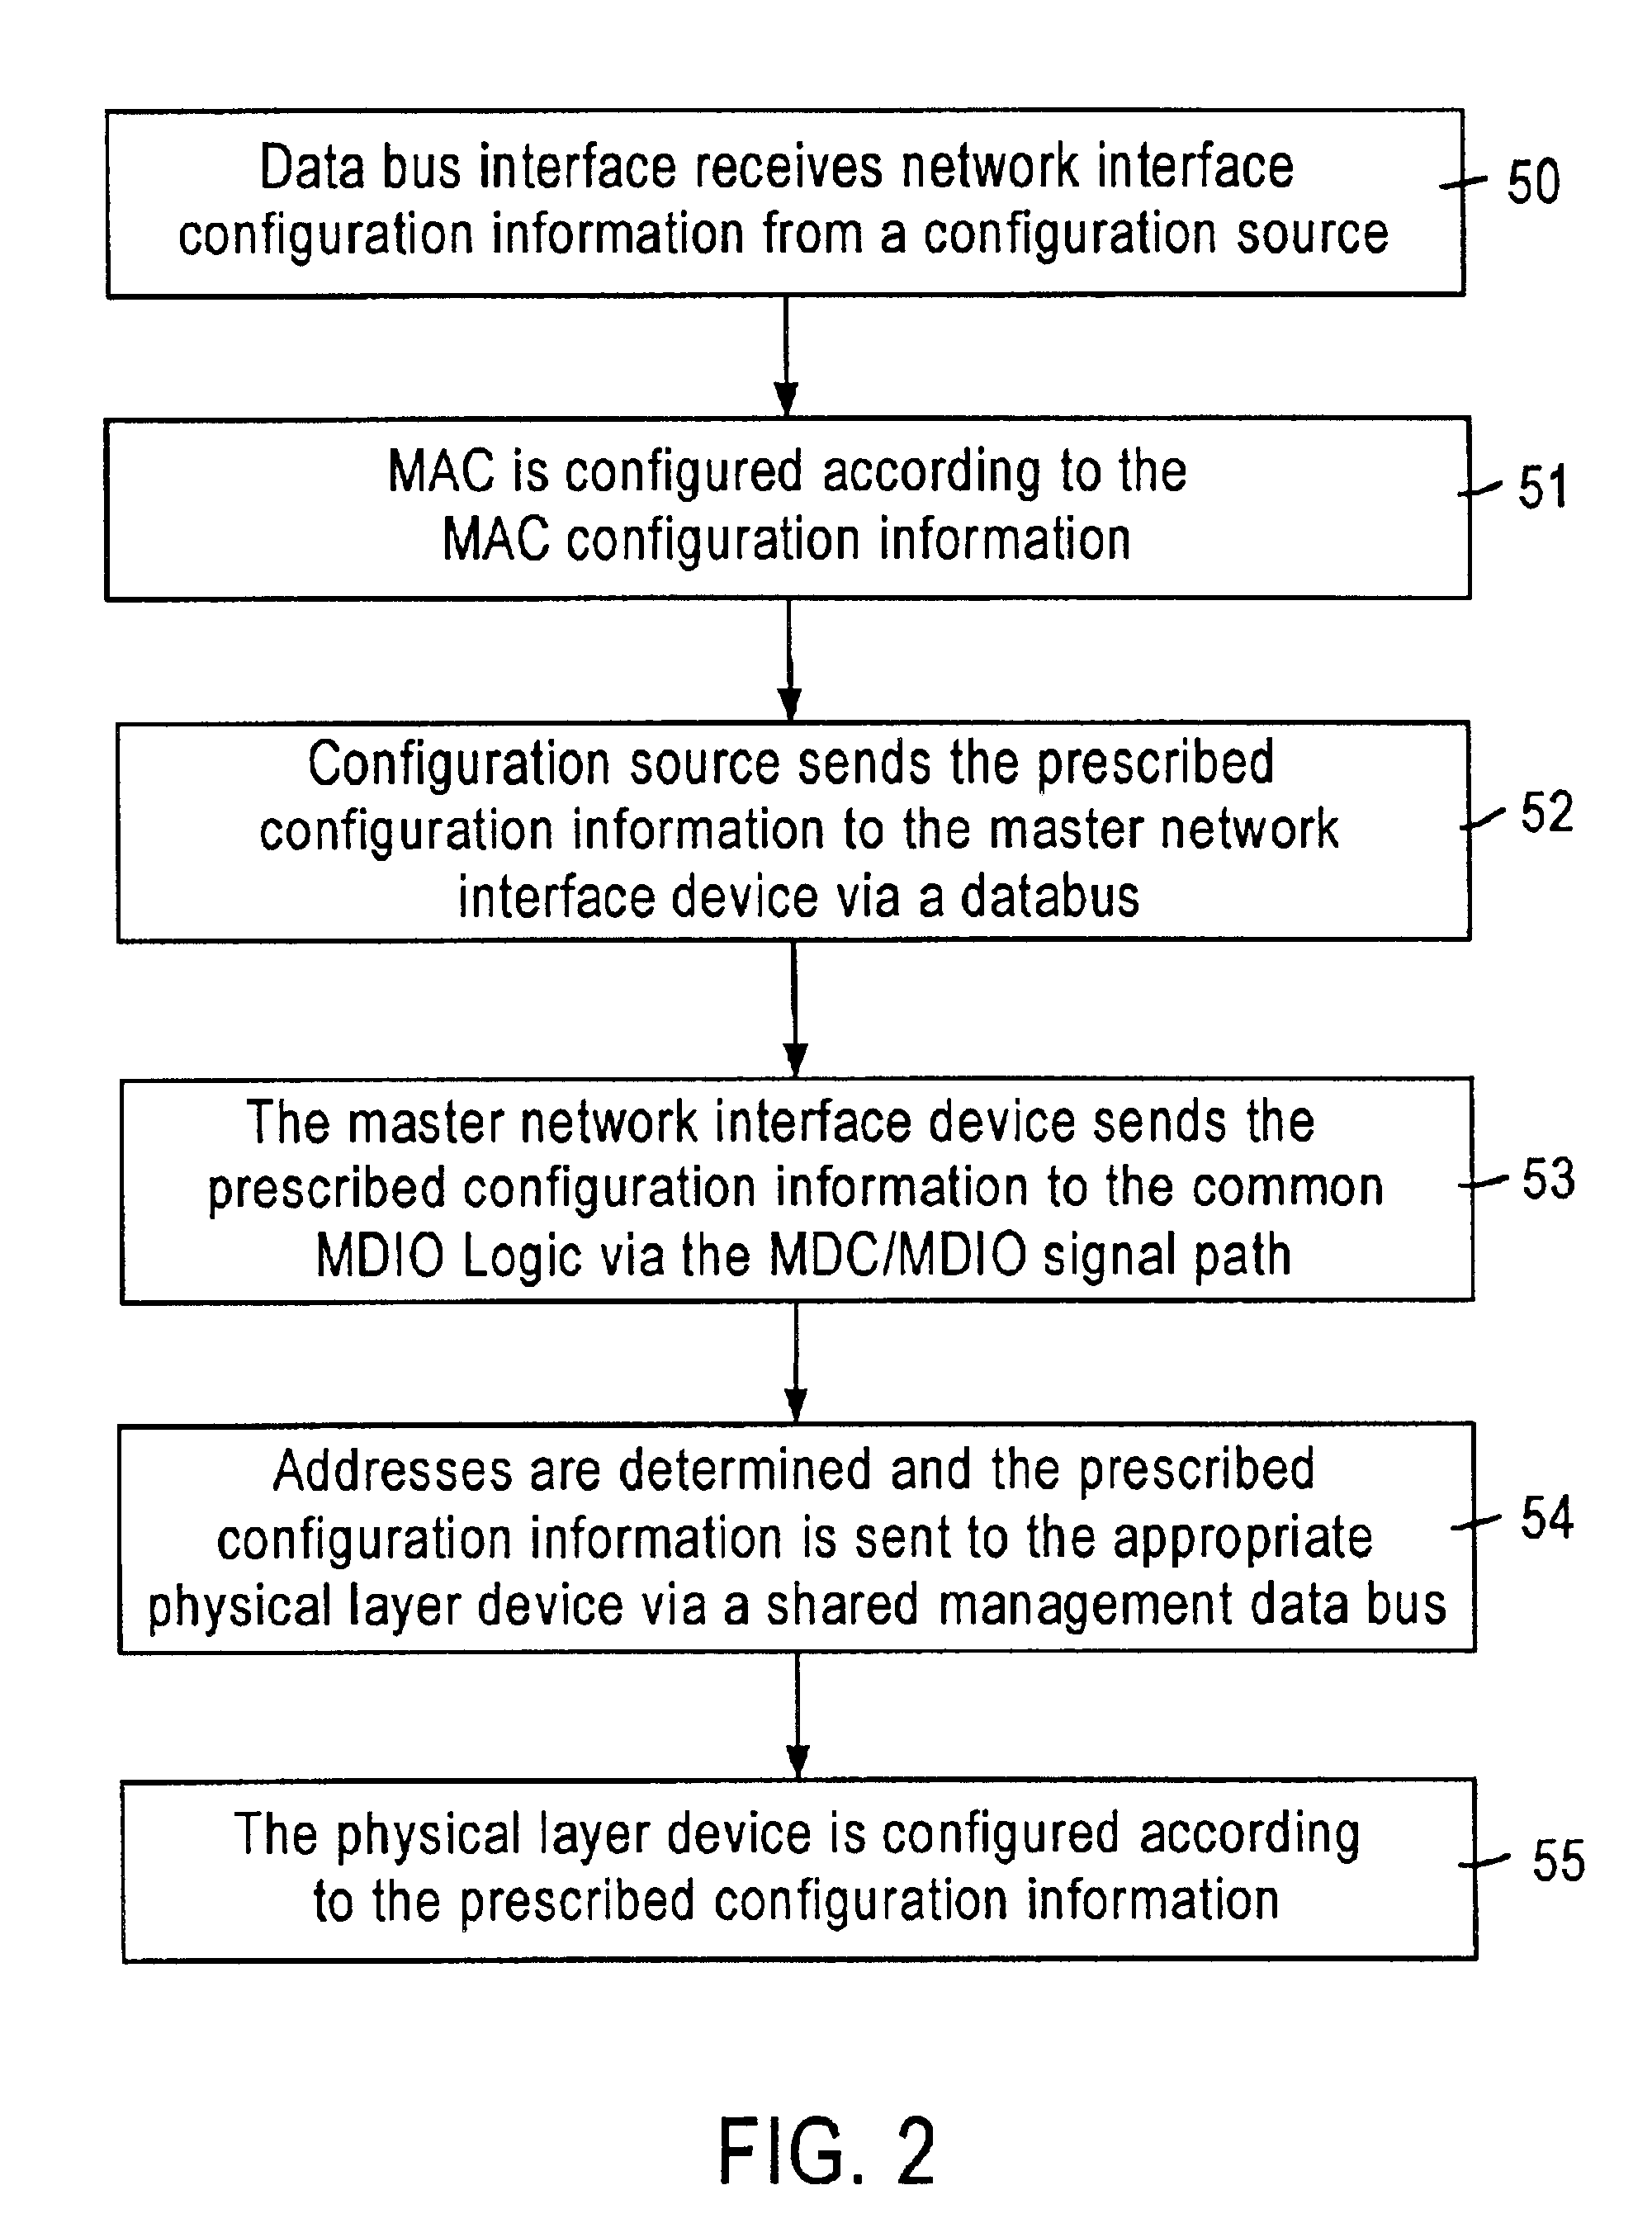 System and method enabling configuration of physical layer devices and corresponding link partners for communicating network data via a configuration source or auto-negotiation